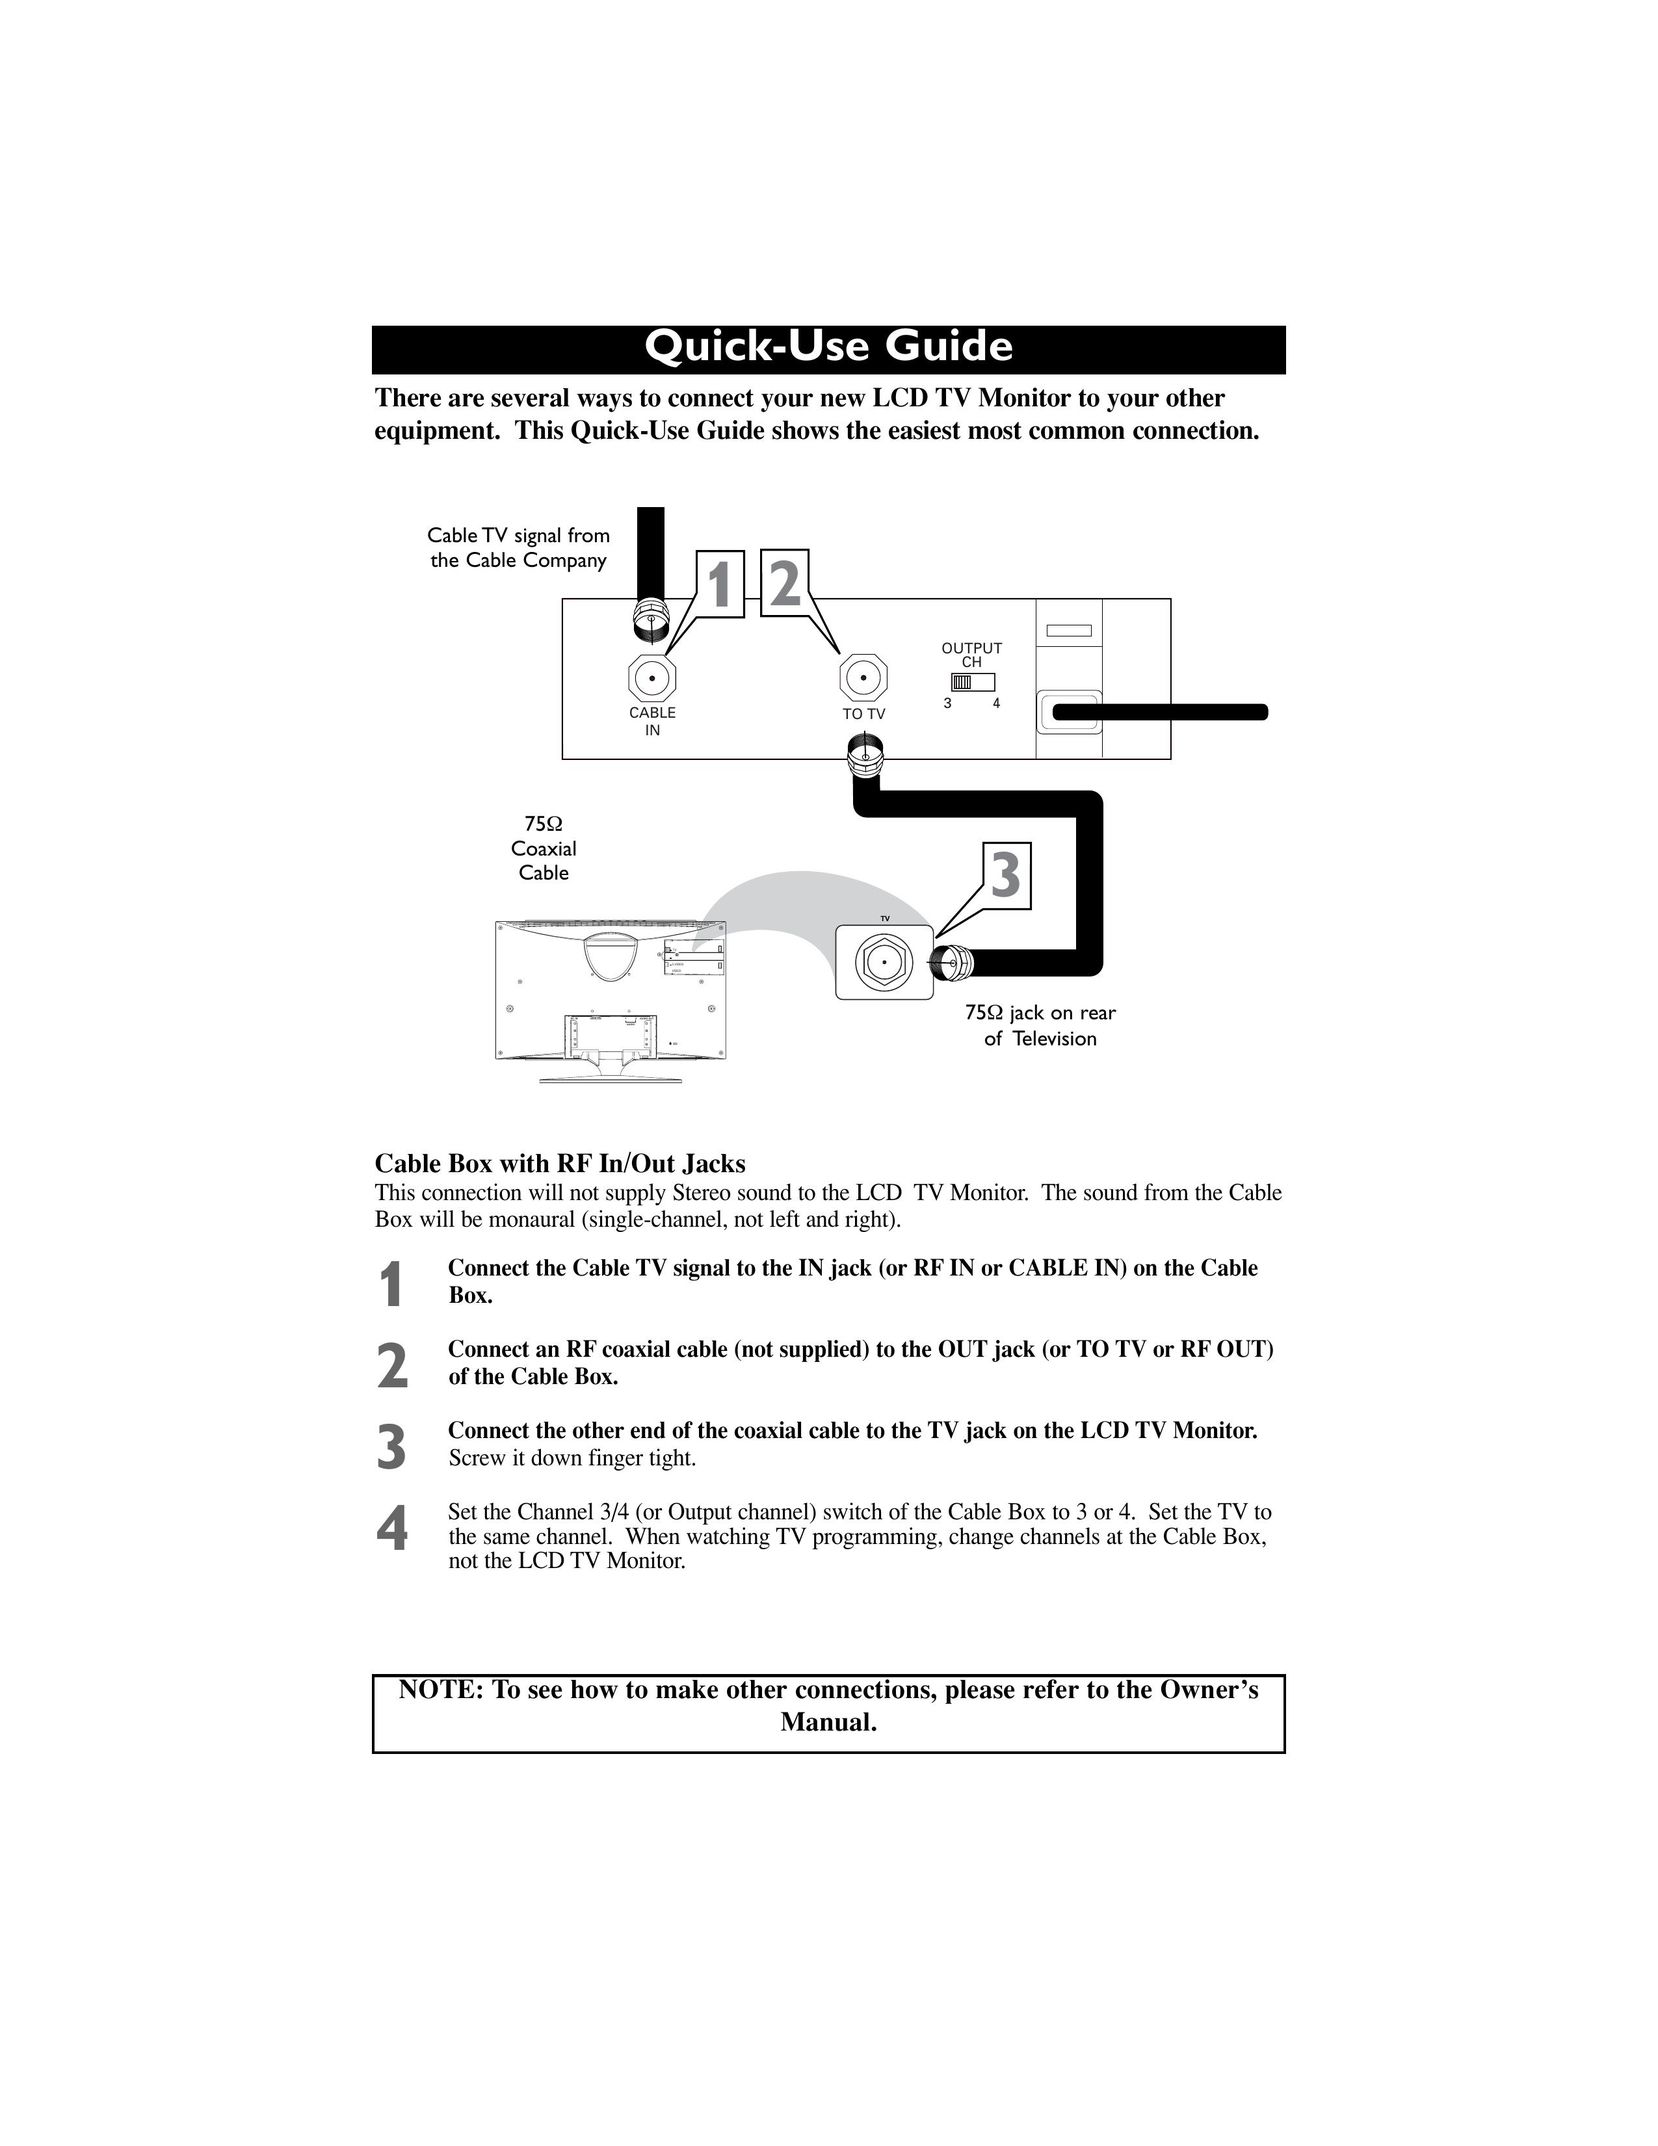 Sony 170S7 Cable Box User Manual